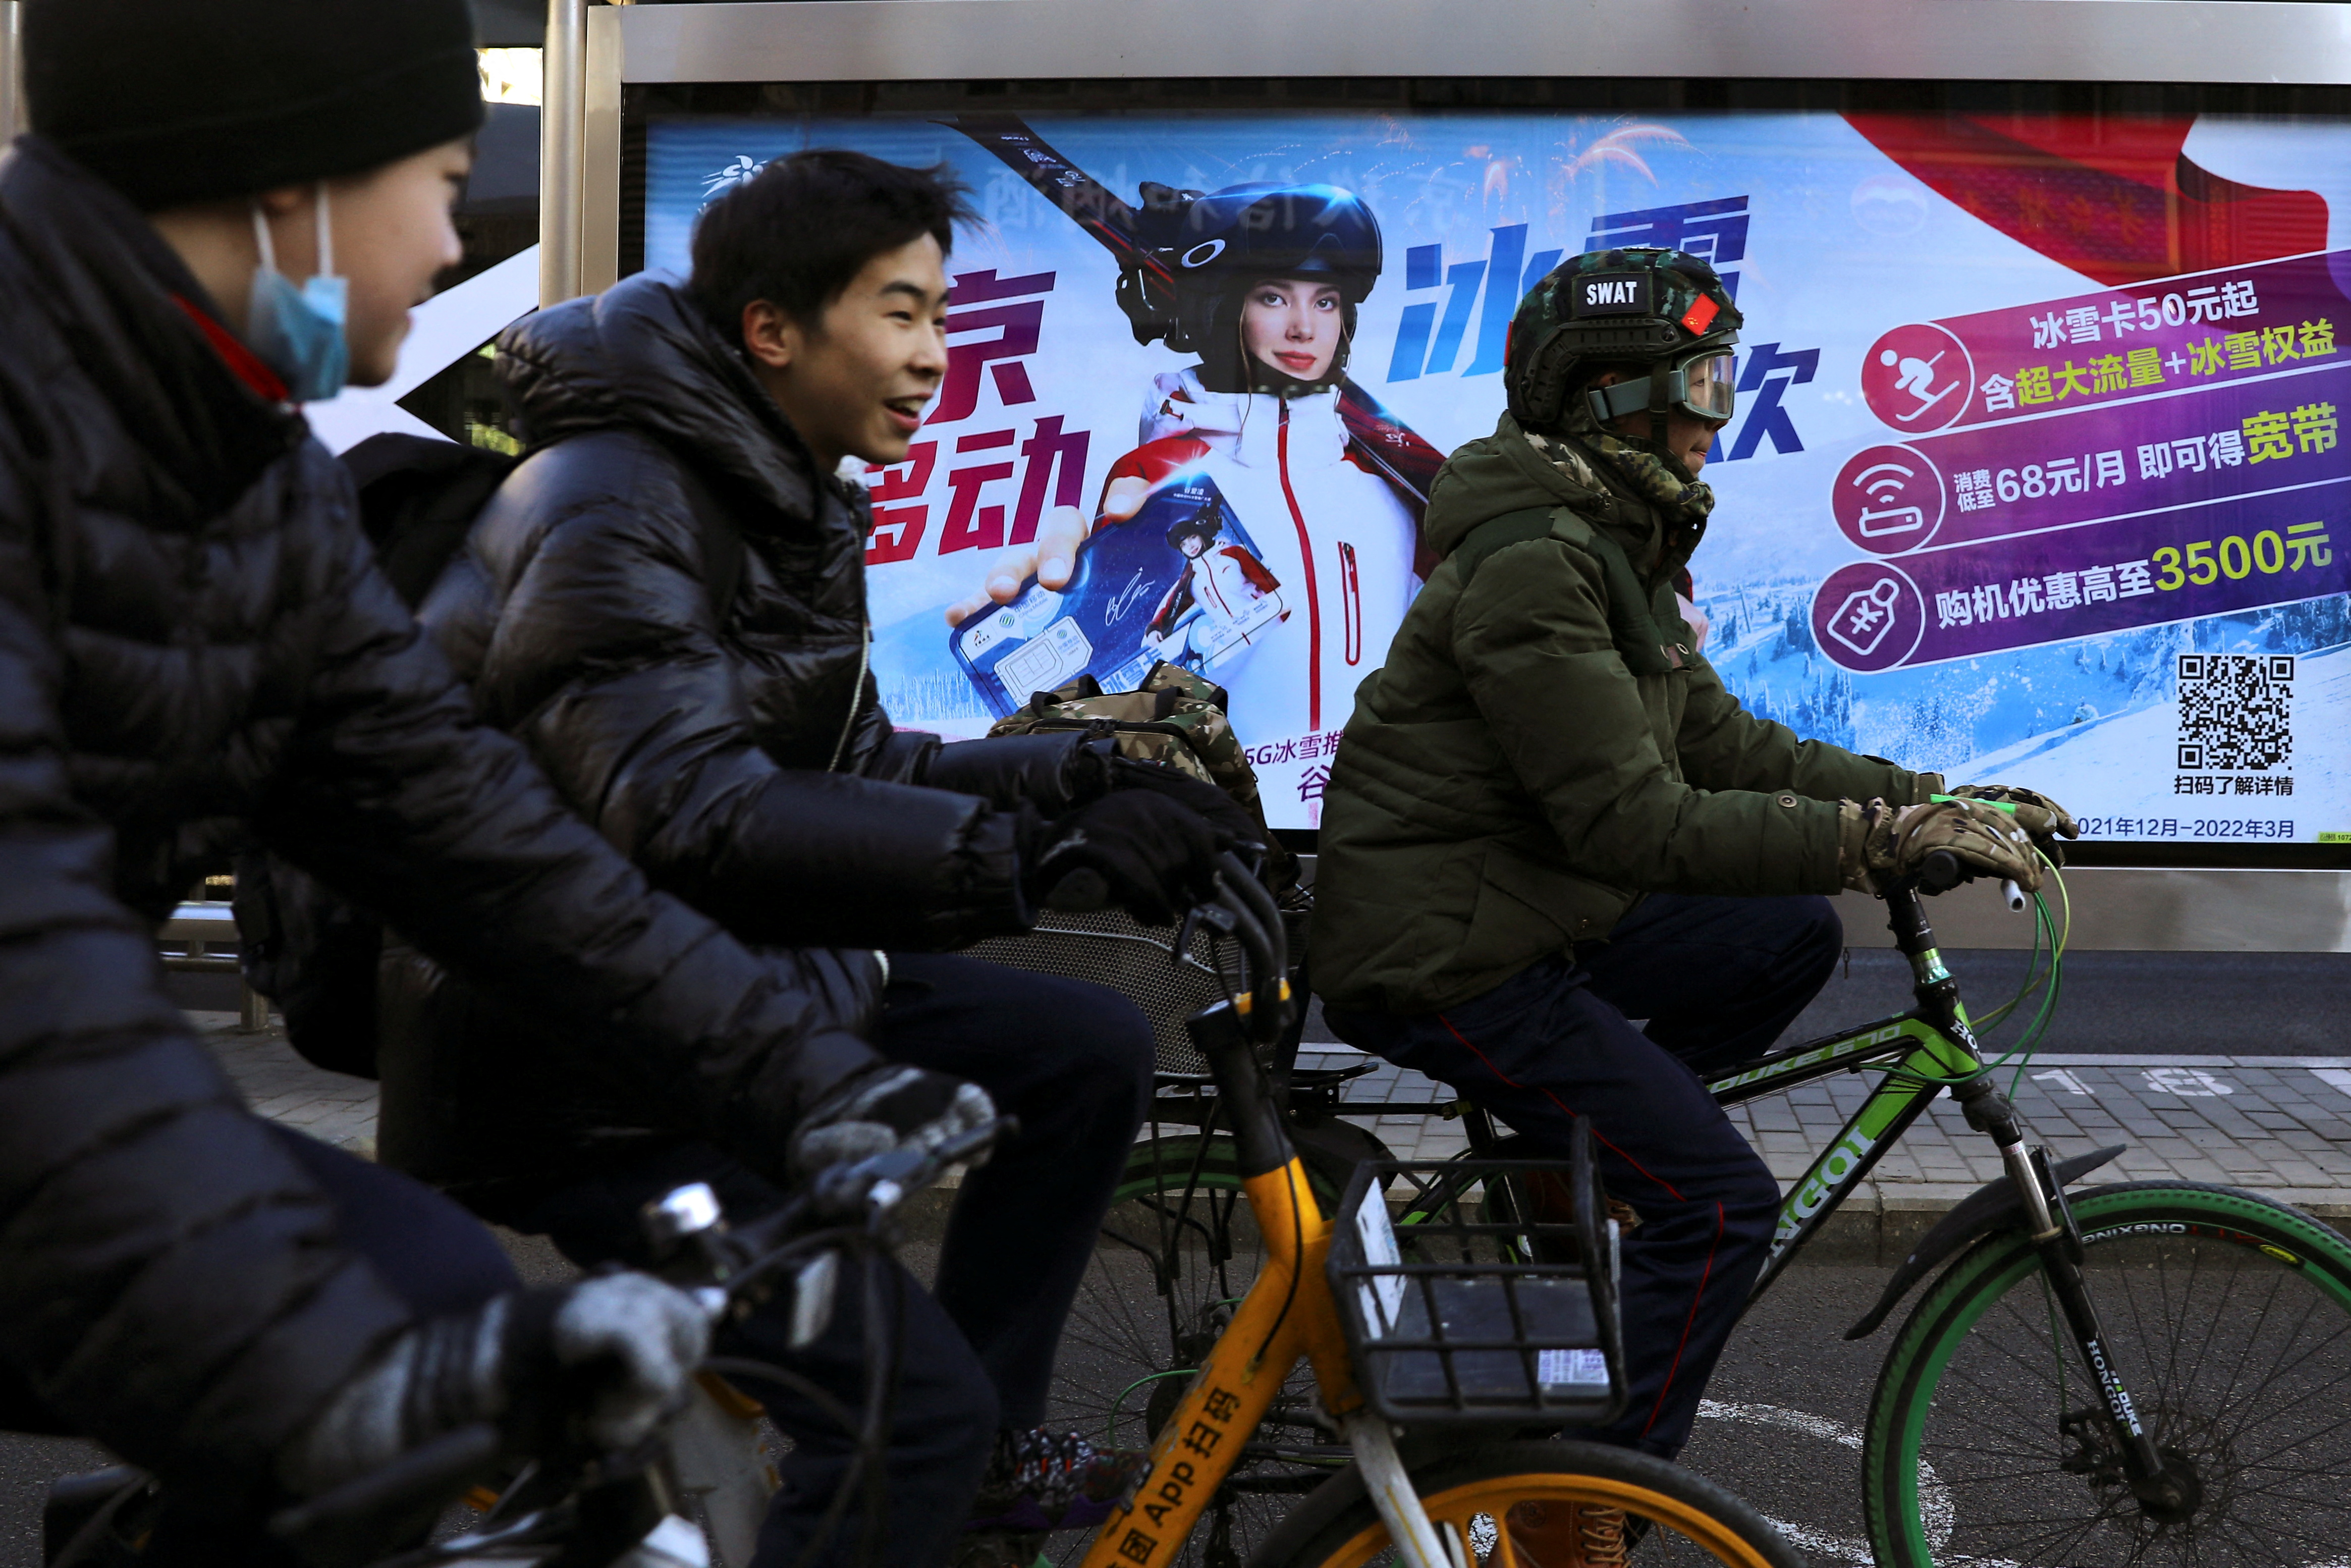 People ride bicycles past an advertisement with an image of Eileen Gu, at a bus stop in Beijing